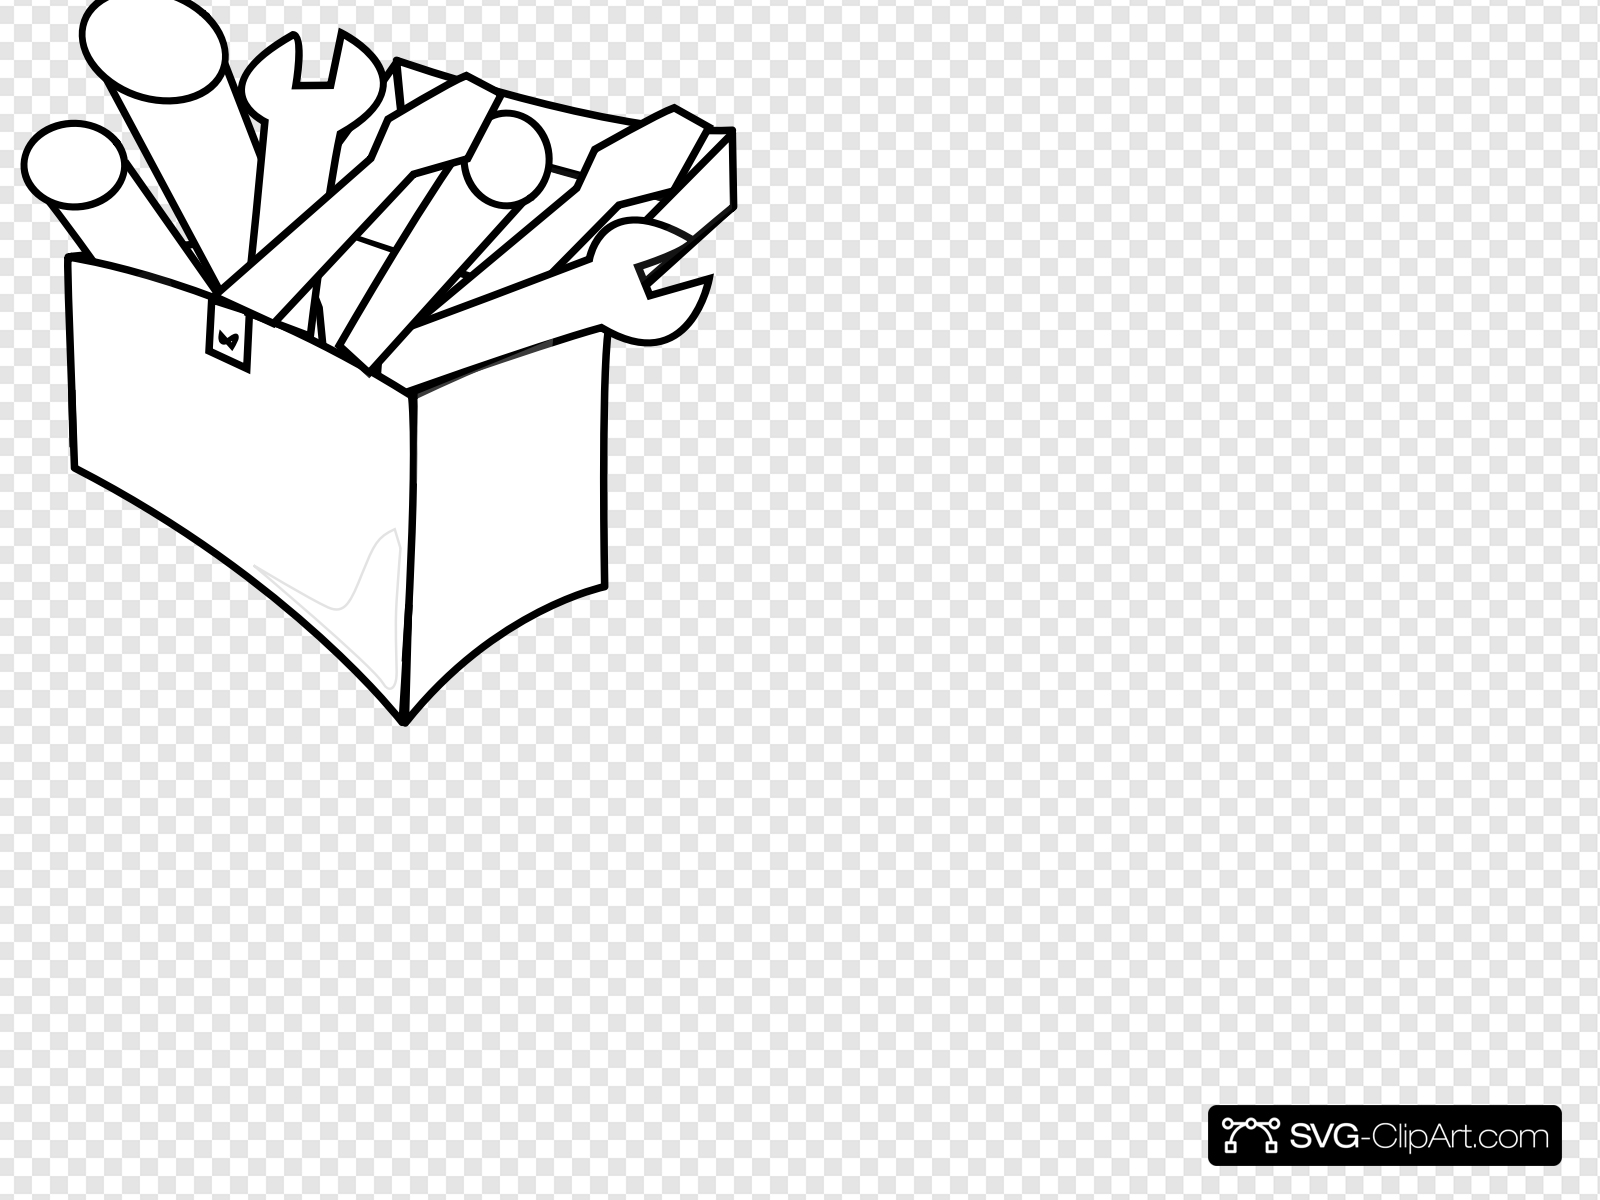 White Tool Box Clip art, Icon and SVG.